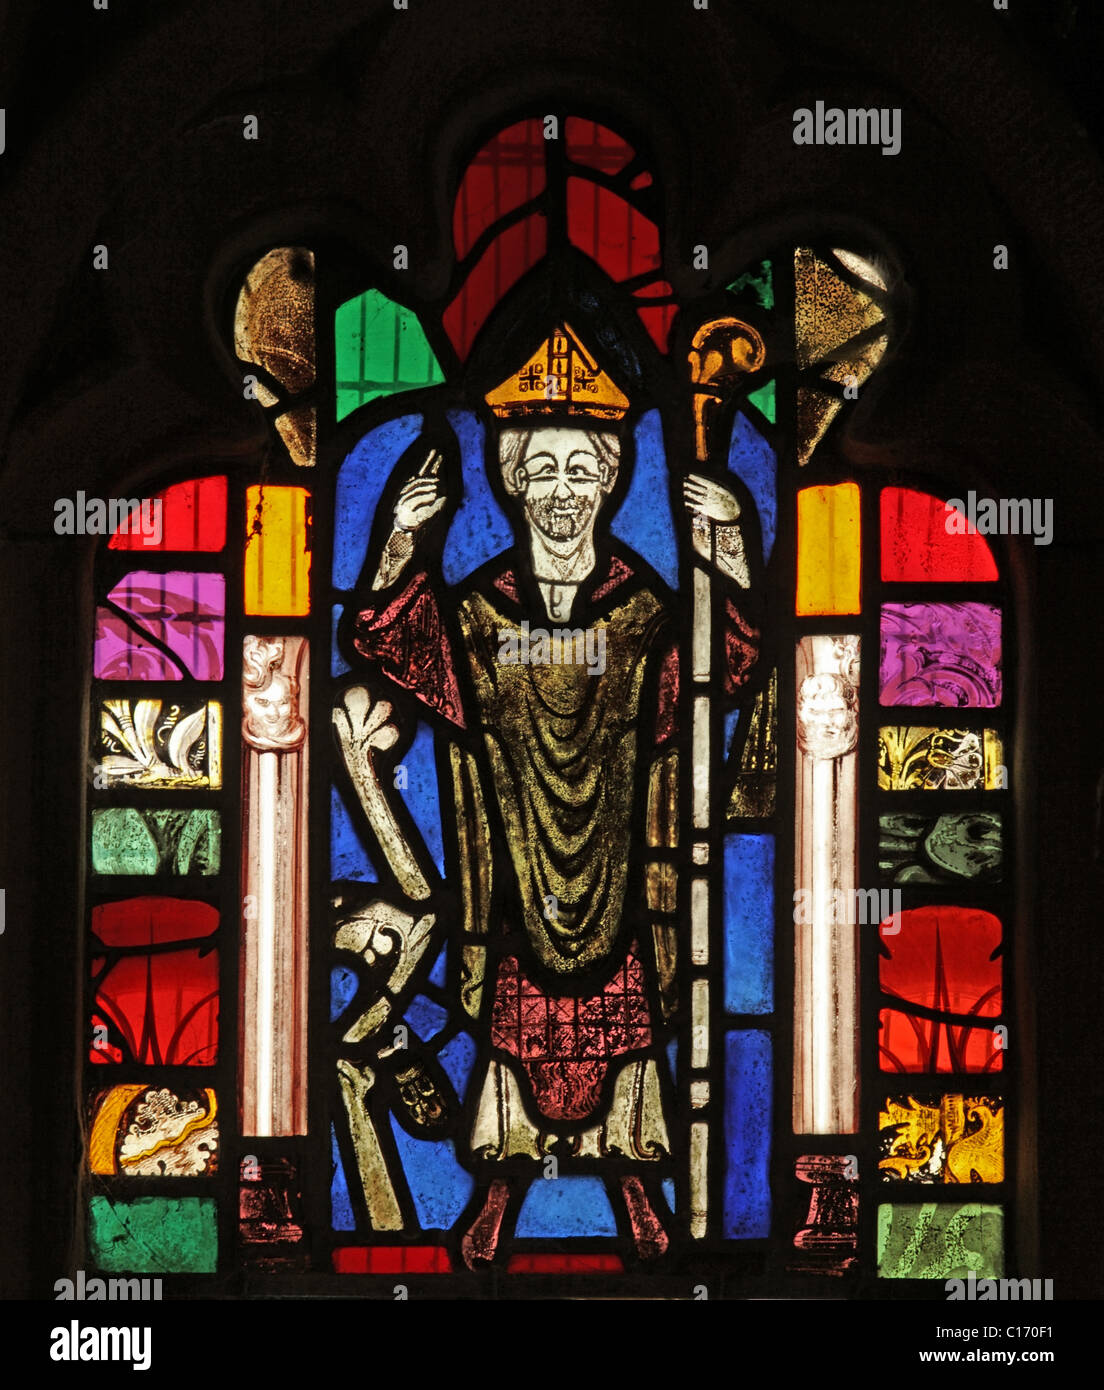 A medieval stained glass window depicting Saint Cuthbert, St Cuthbert's Church, Edenhall near Penrith, Cumbria. Stock Photo